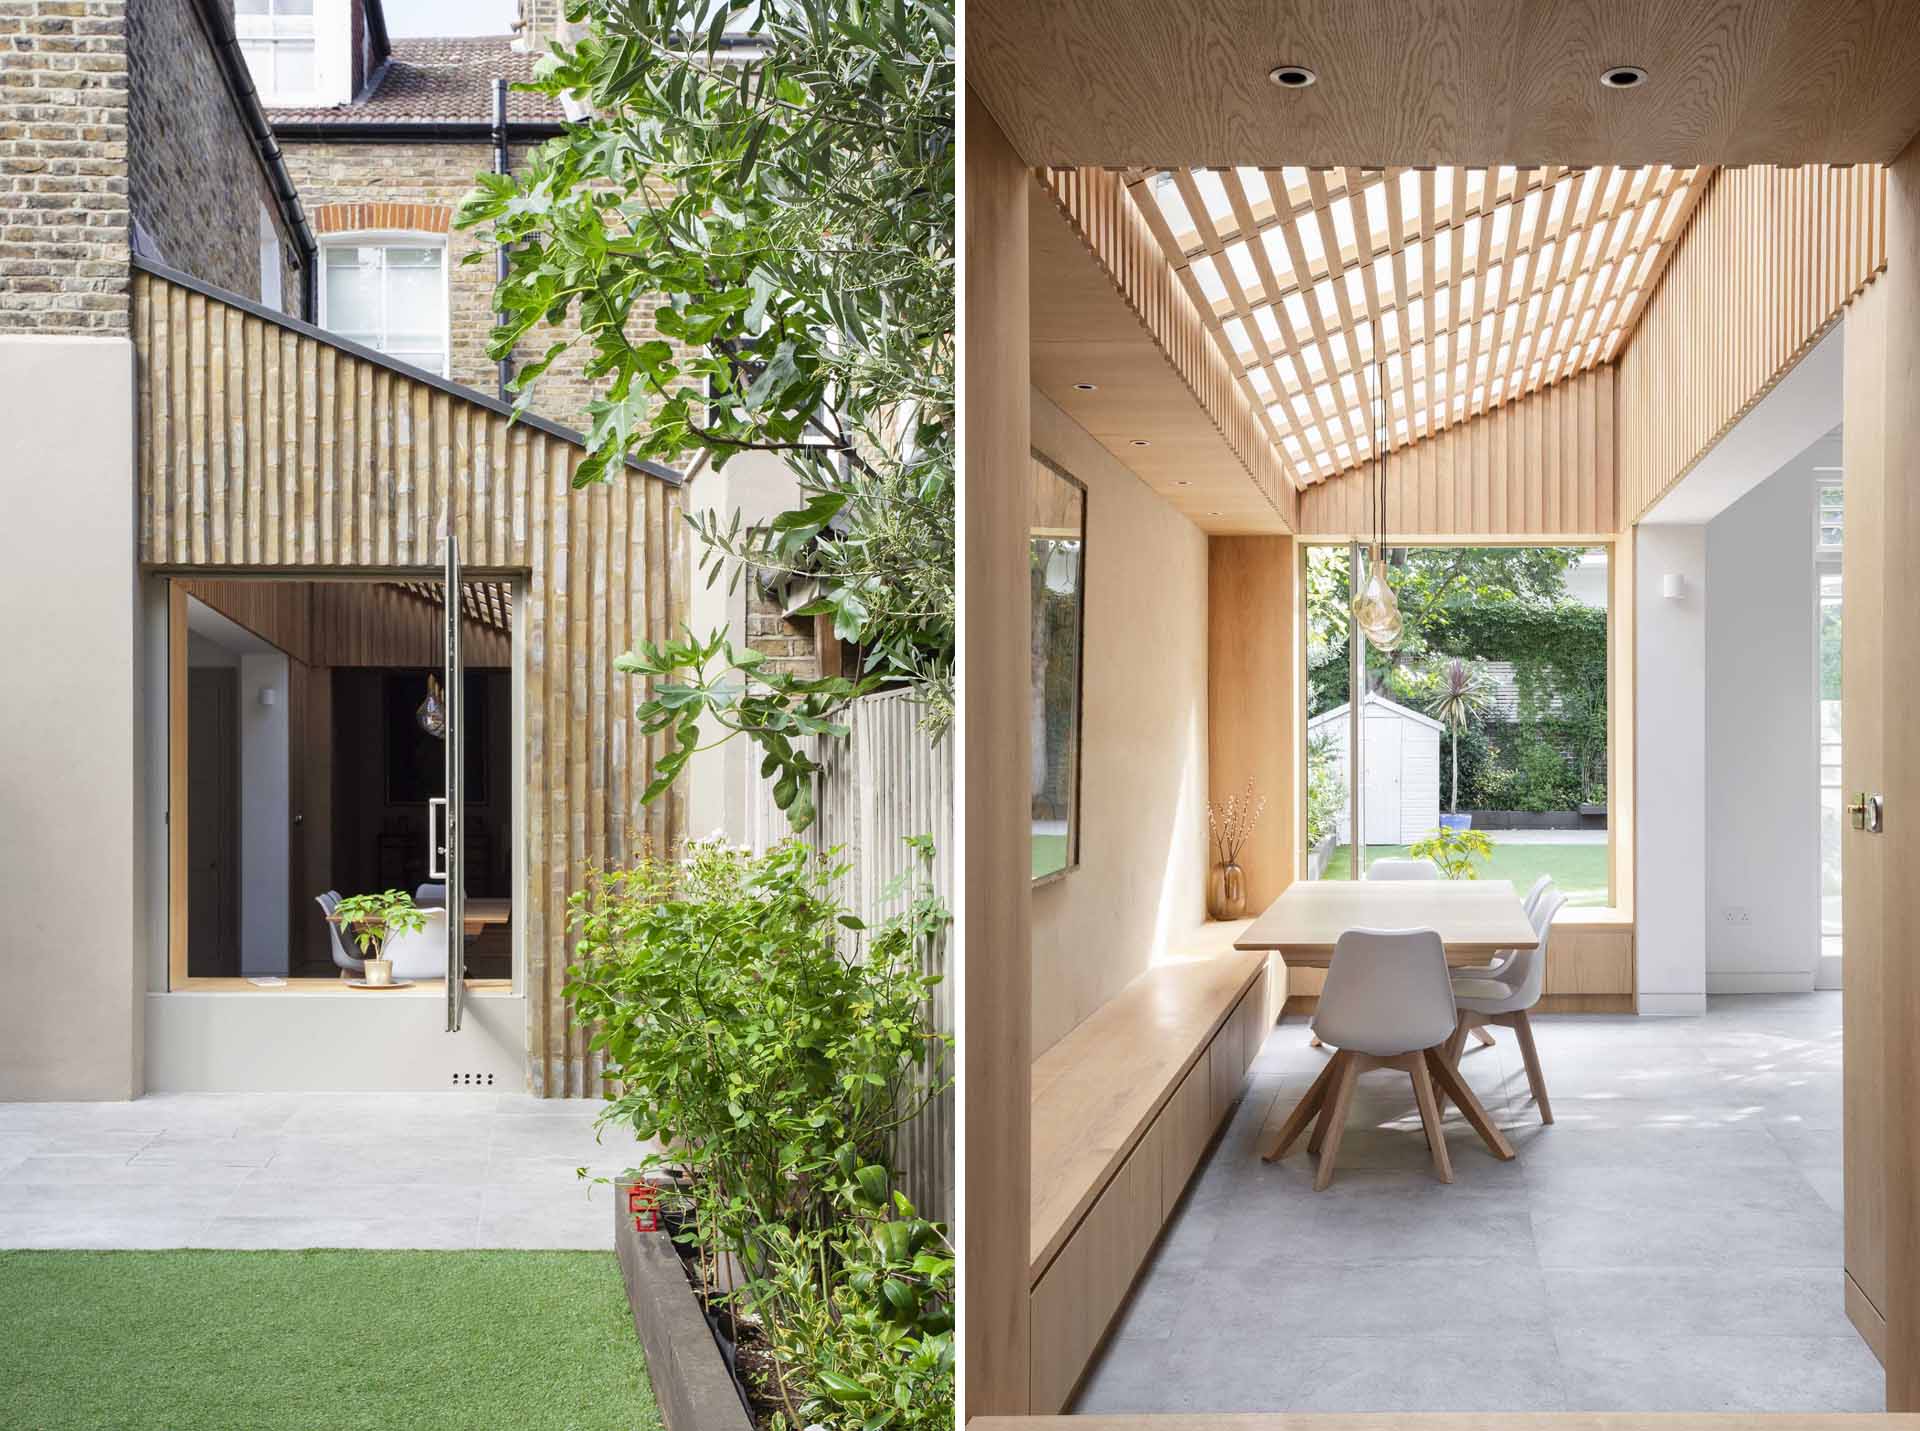 YARD Architects has shared photos of a side extension they re-imagined for a home in Greater London, England, that creates an open and bright dining area and kitchen.